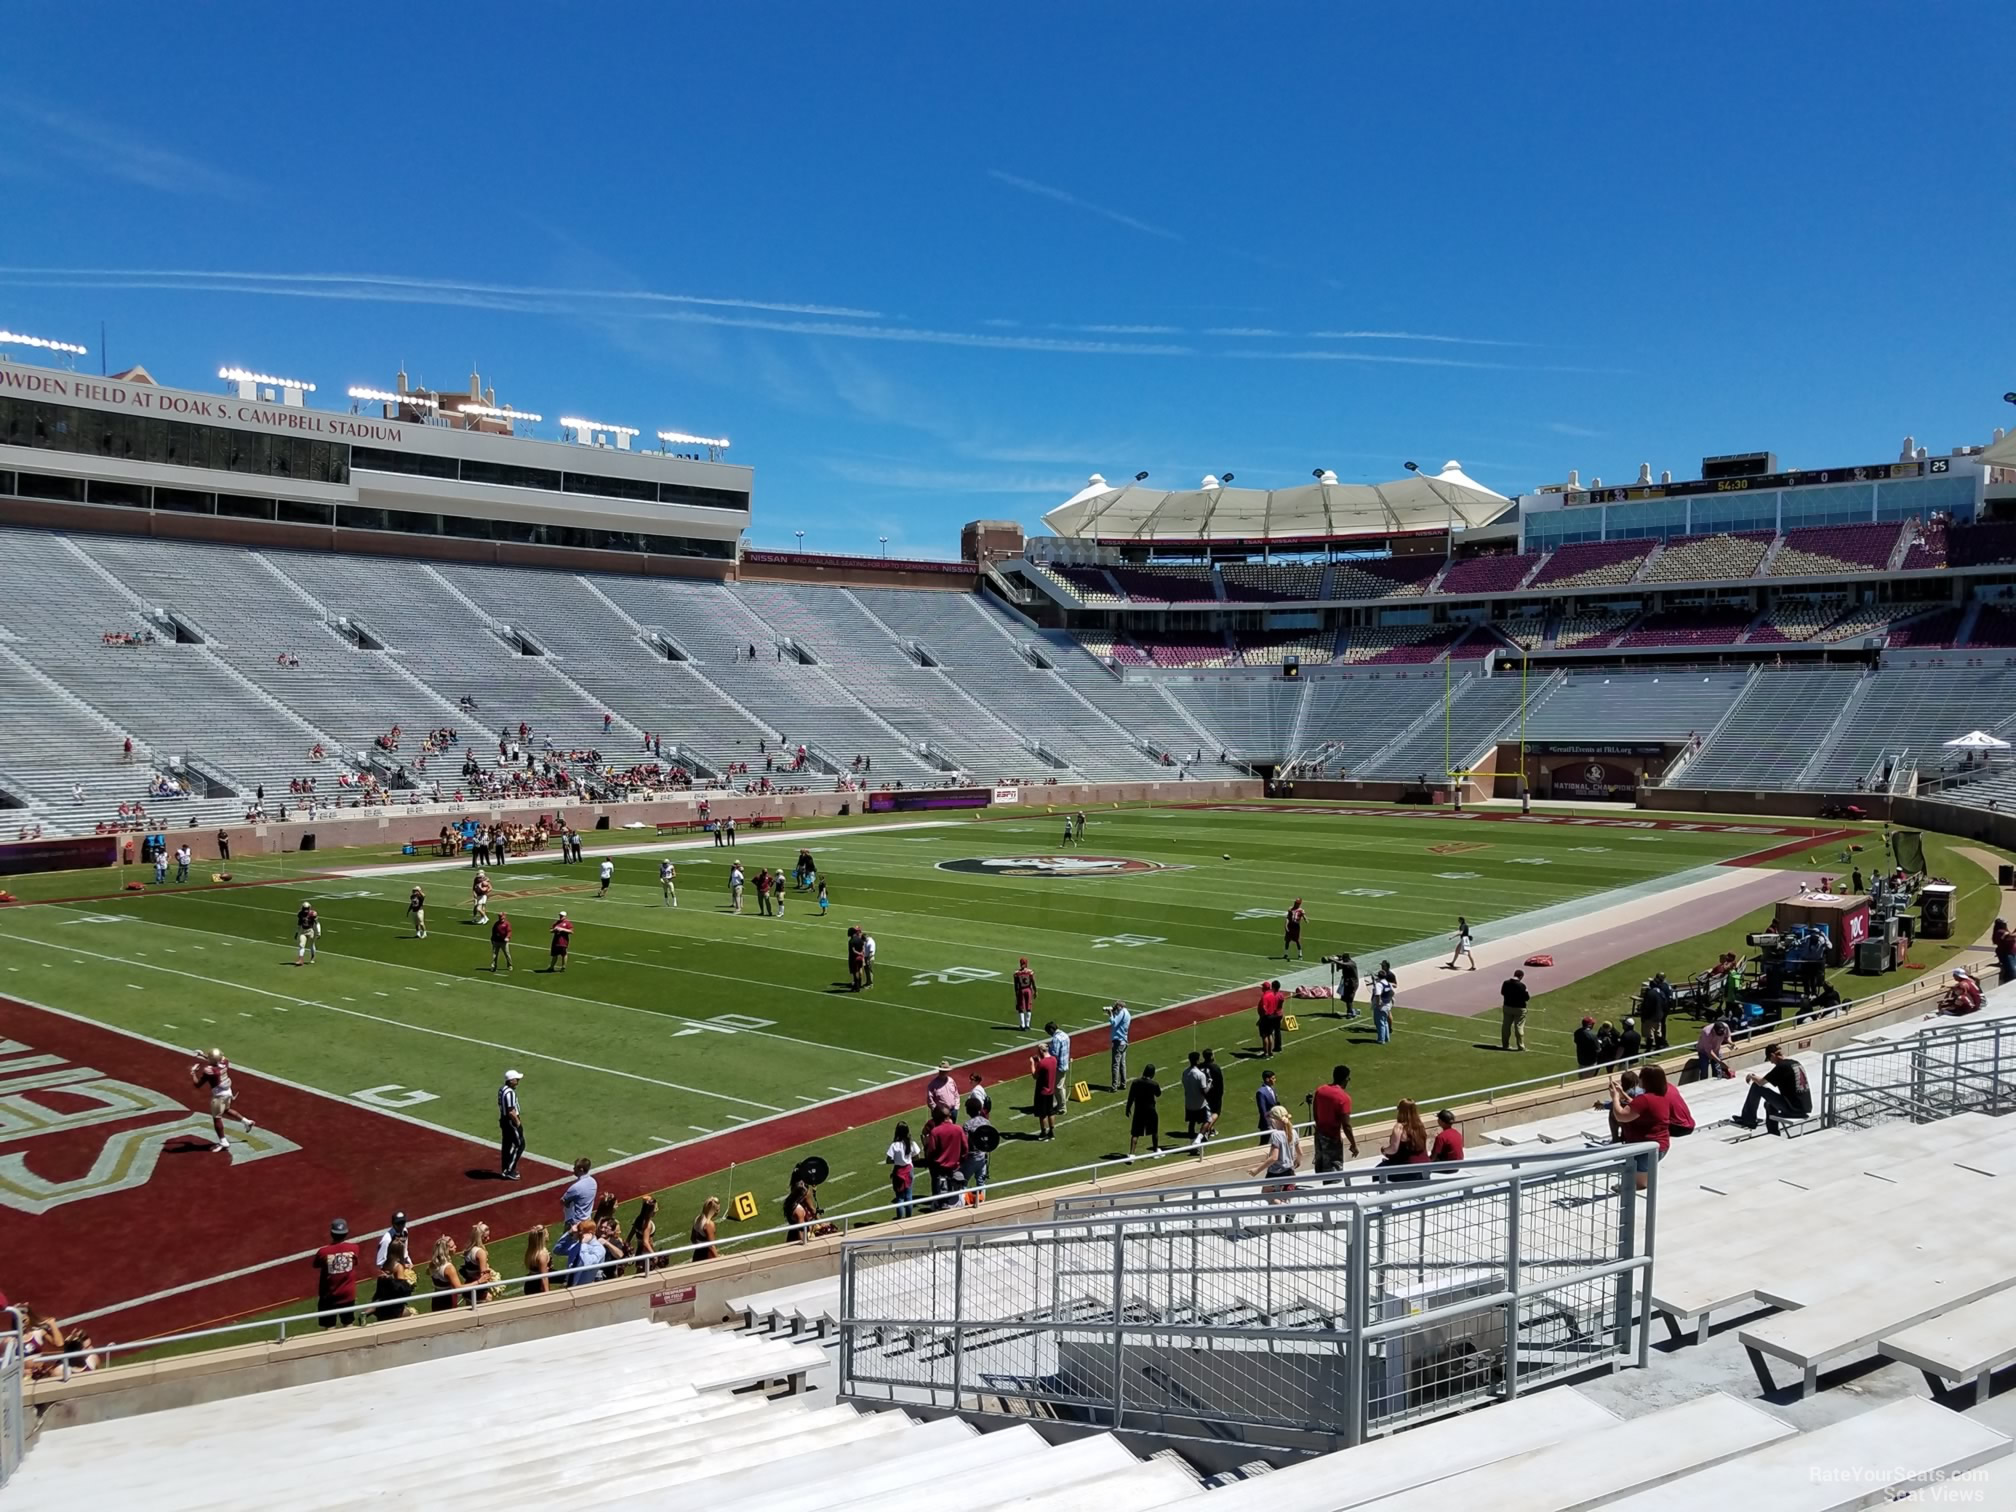 section 38, row 25 seat view  - doak campbell stadium